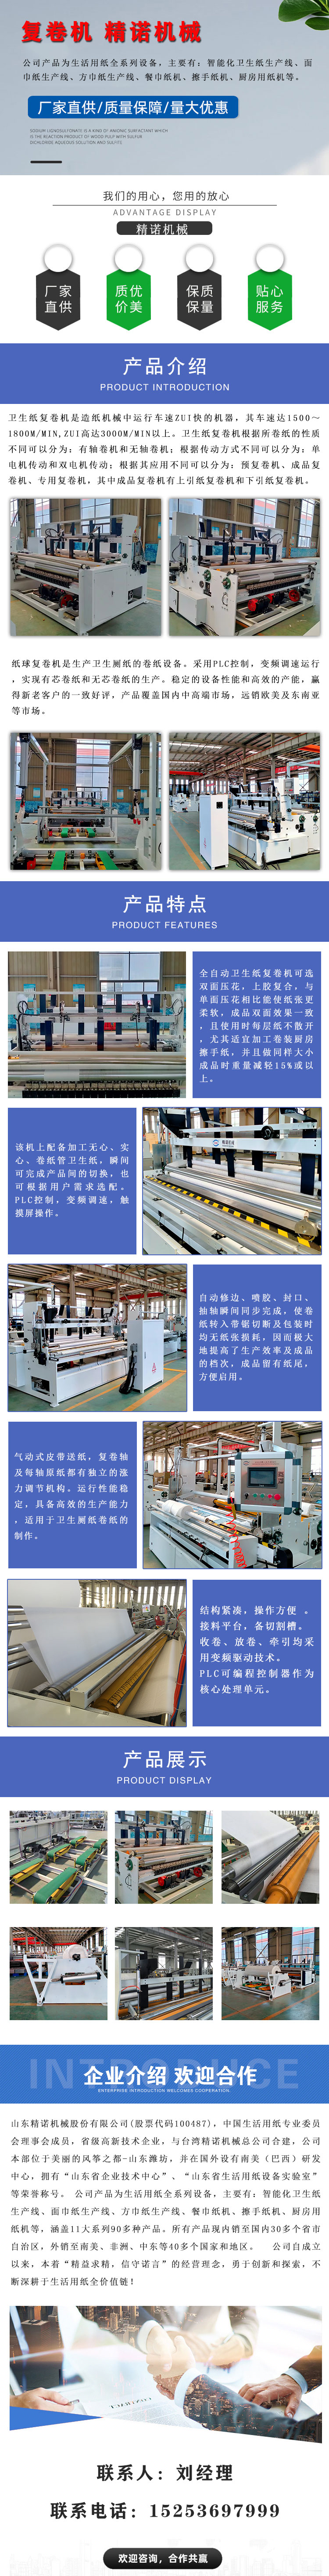 Small tray paper slitting and rewinding machine Web paper production machine Fully automatic toilet paper processing equipment